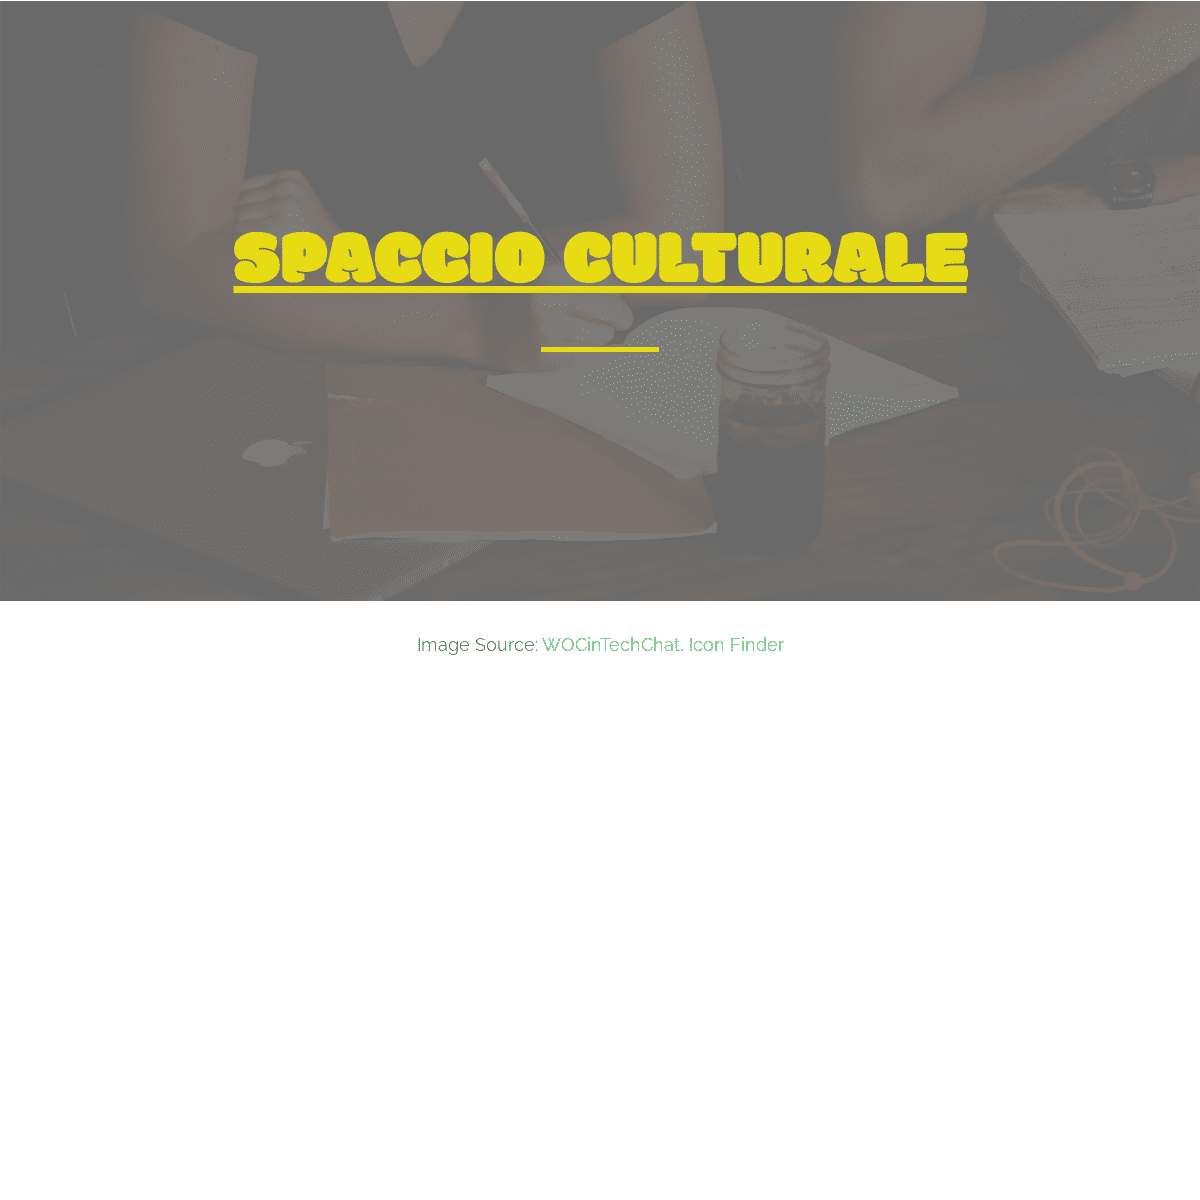 A complete backup of https://spaccioculturale.org